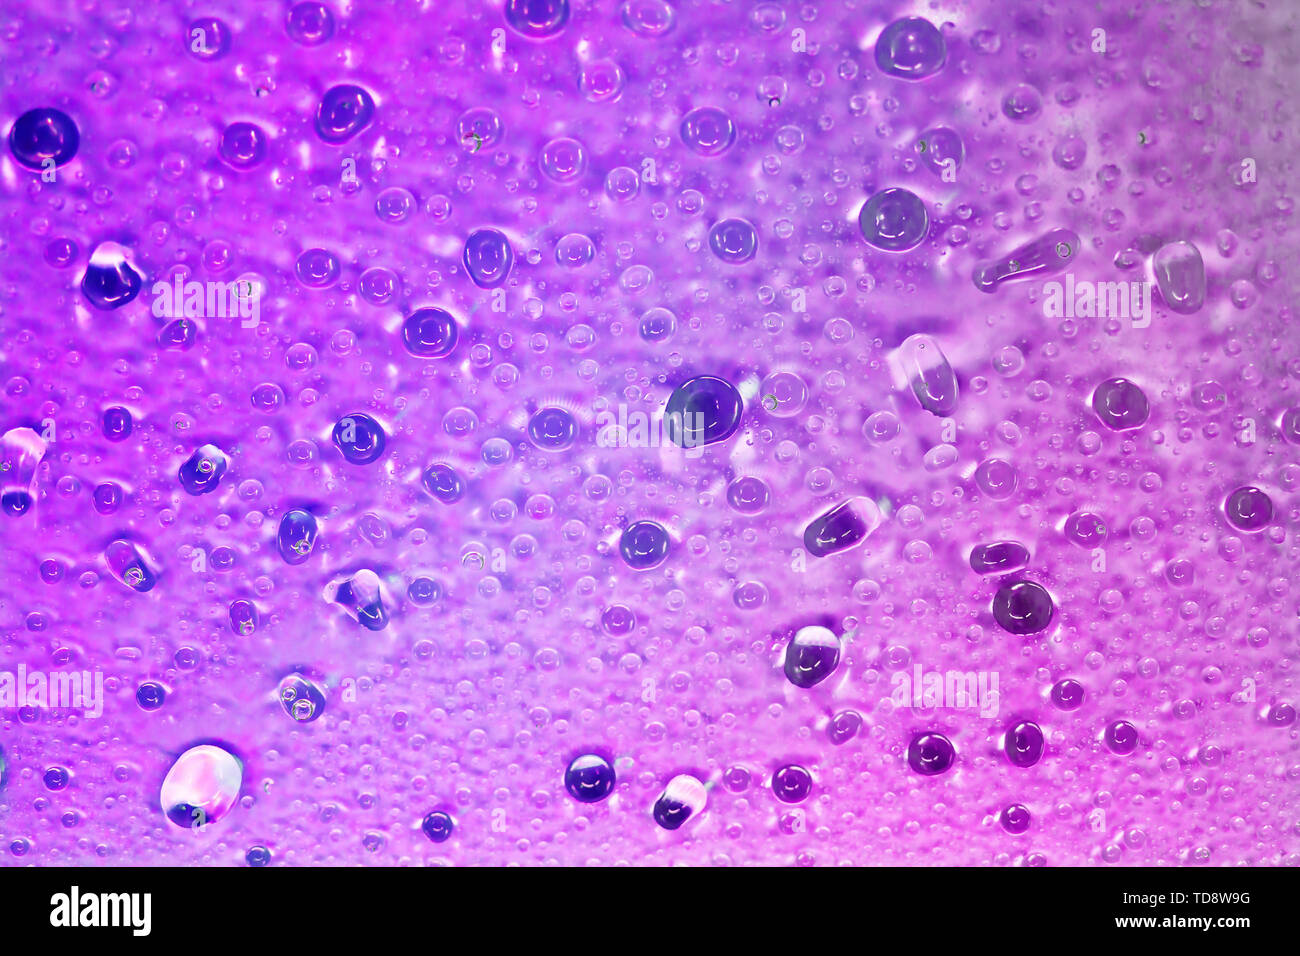 Beautiful violet drops of water fit for the background image Stock Photo